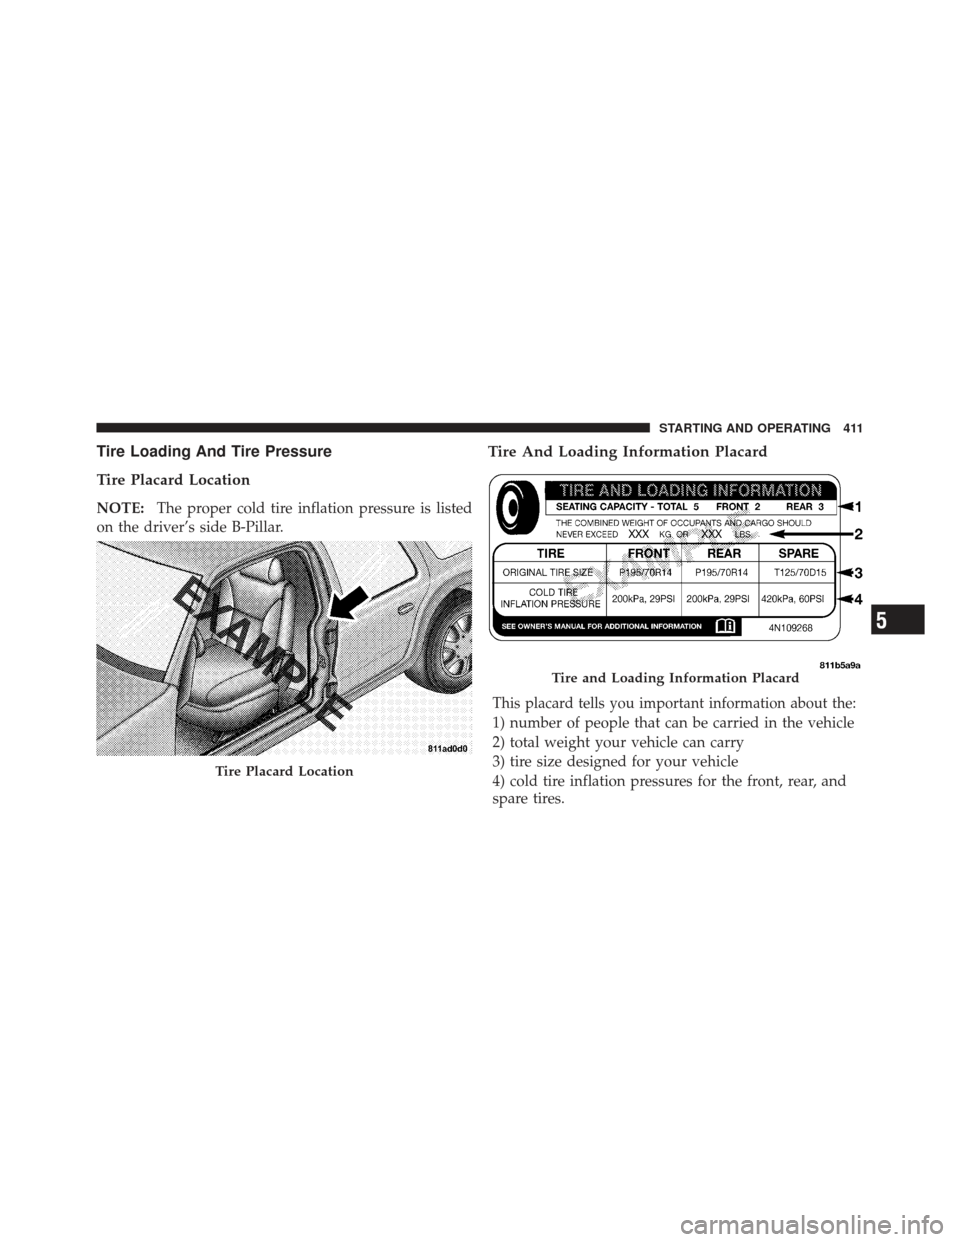 Ram 1500 2011  Owners Manual Tire Loading And Tire Pressure
Tire Placard Location
NOTE:The proper cold tire inflation pressure is listed
on the driver’s side B-Pillar.
Tire And Loading Information Placard
This placard tells you